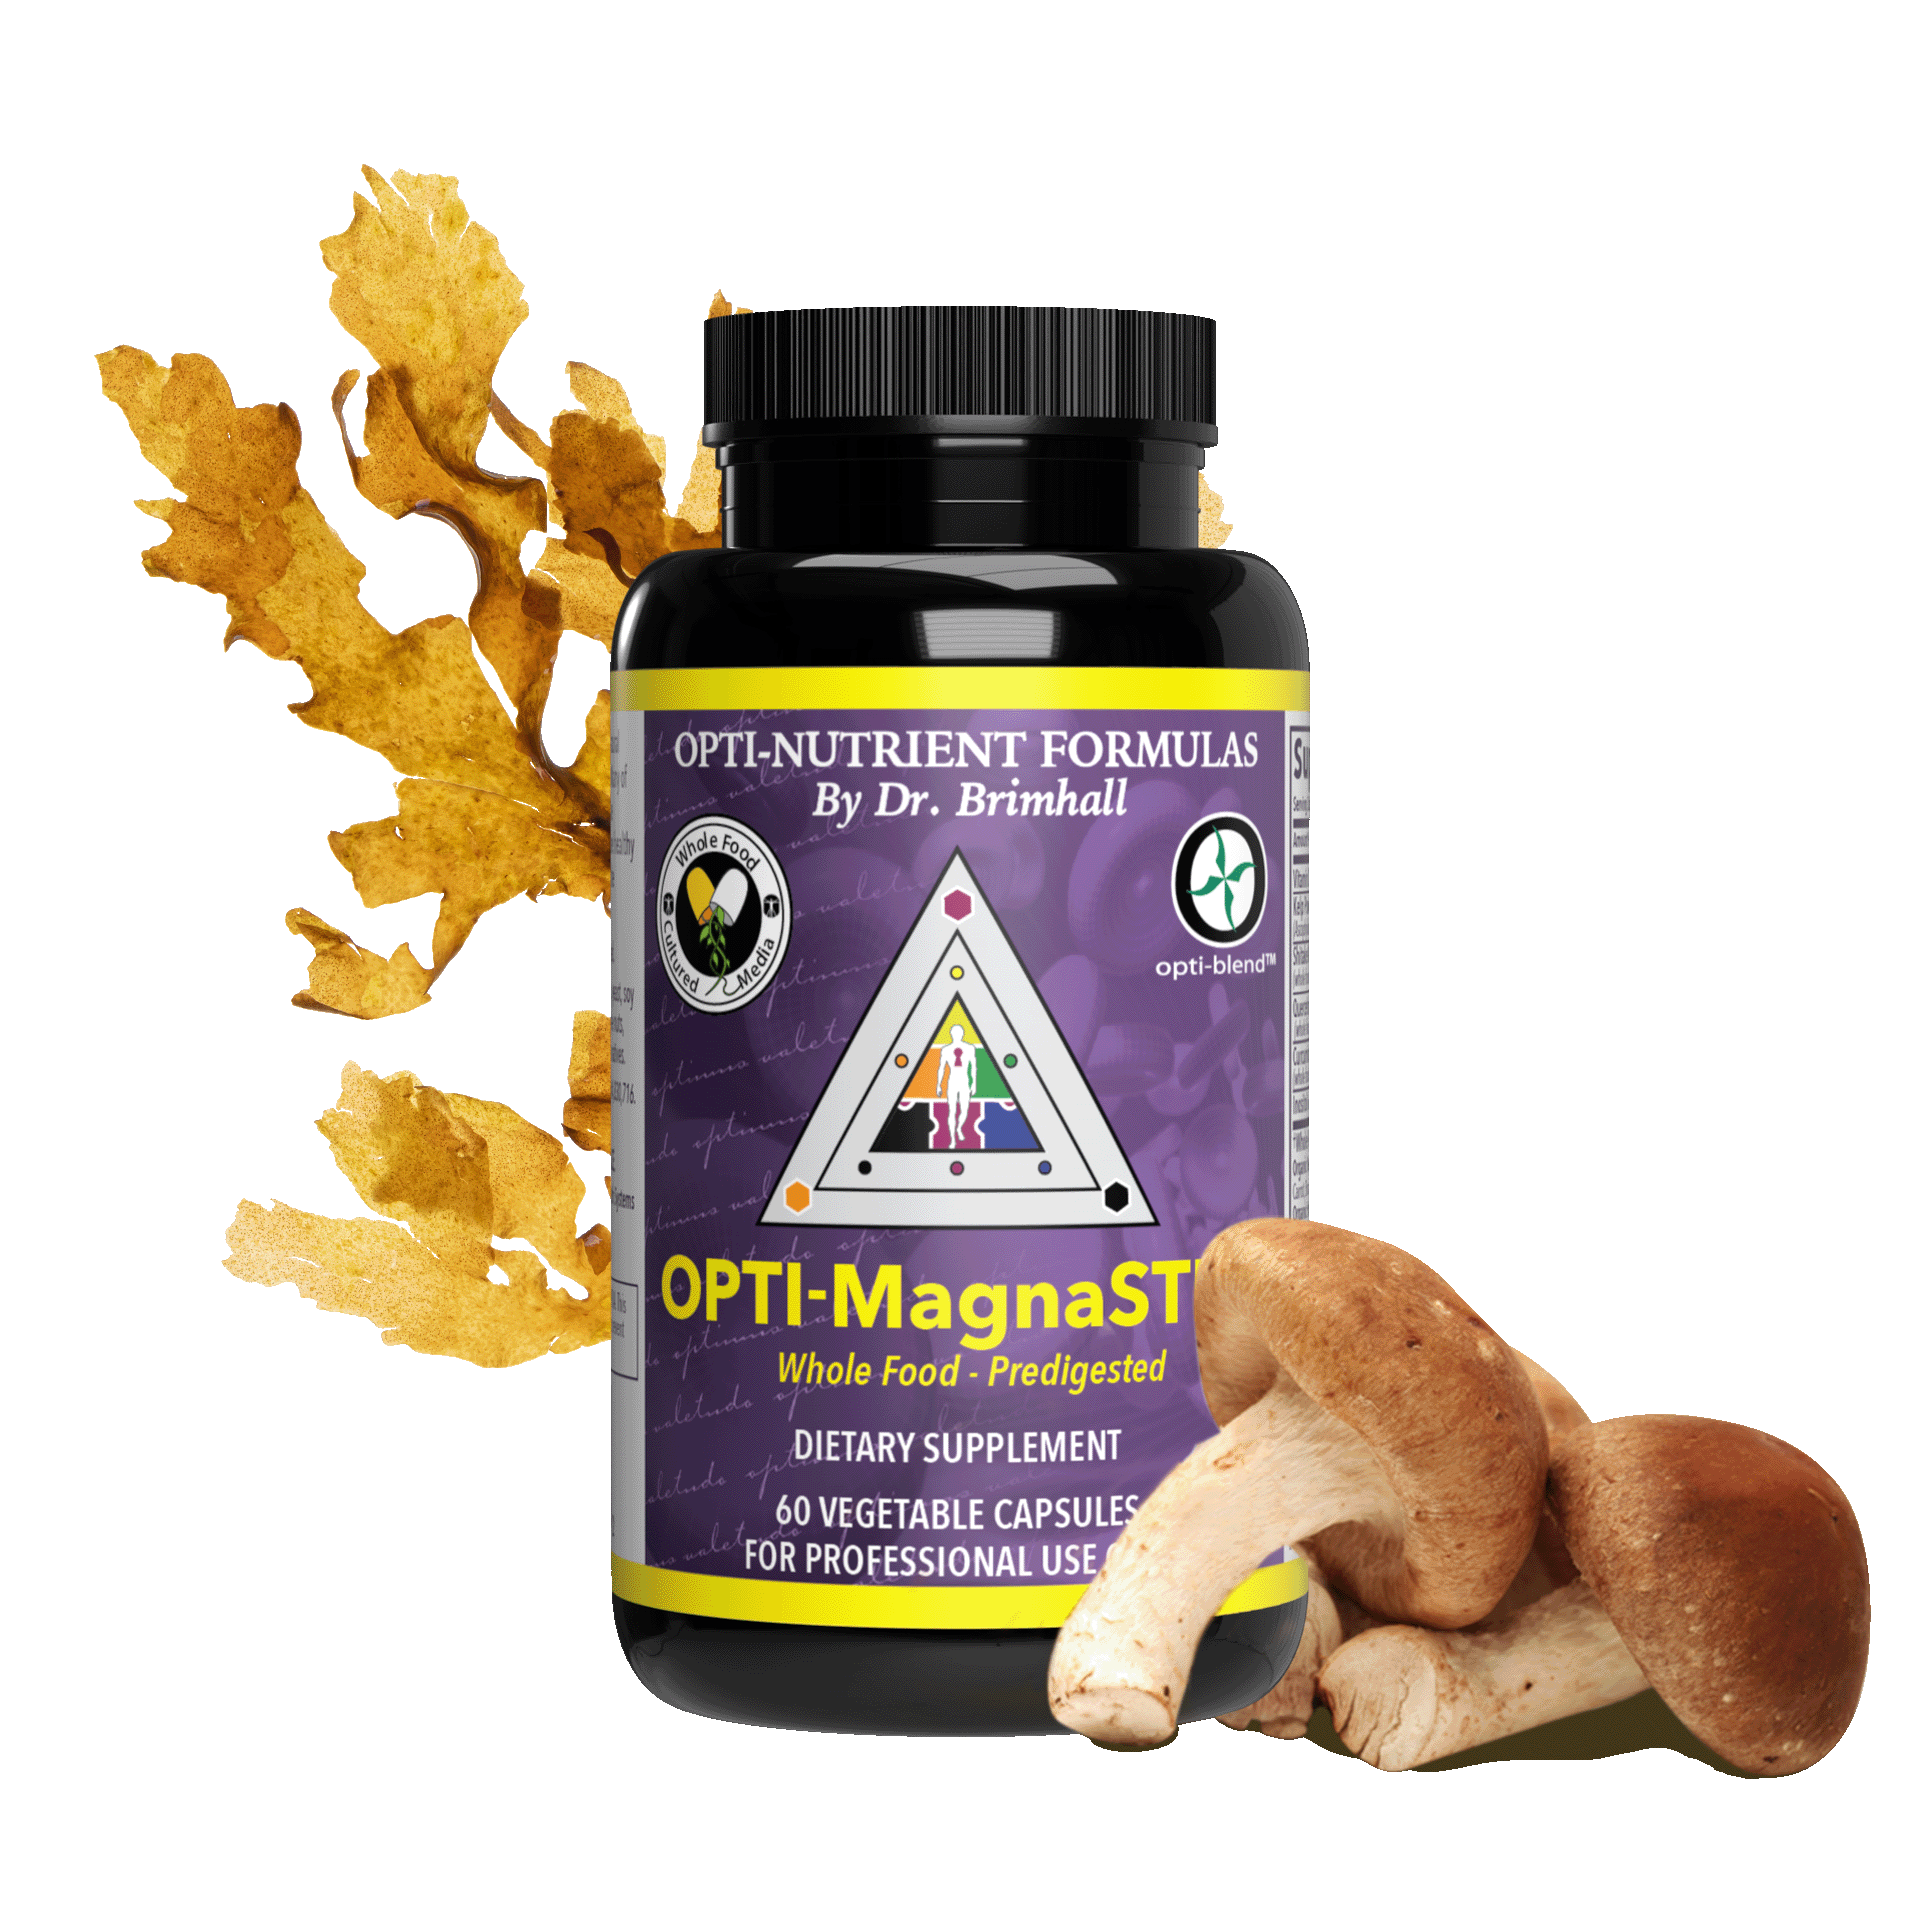 Image of a bottle of Opti-MagnaSTEM with mushrooms and kelp around the bottle.